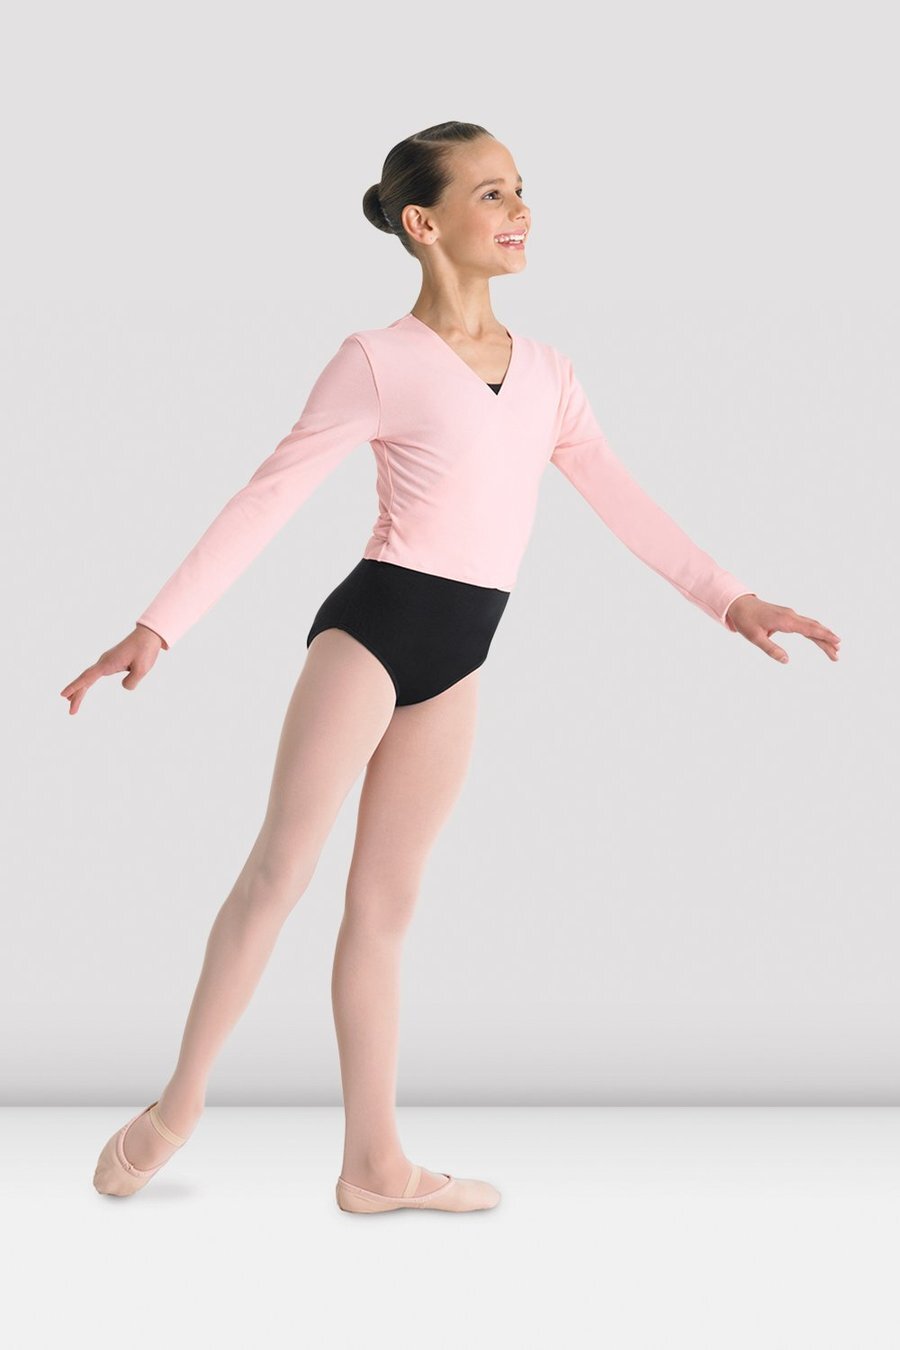 Child Ballet Dance Gymnastics Knit Wrap Sweaters Warm Up Crossover Cardigan Tops 